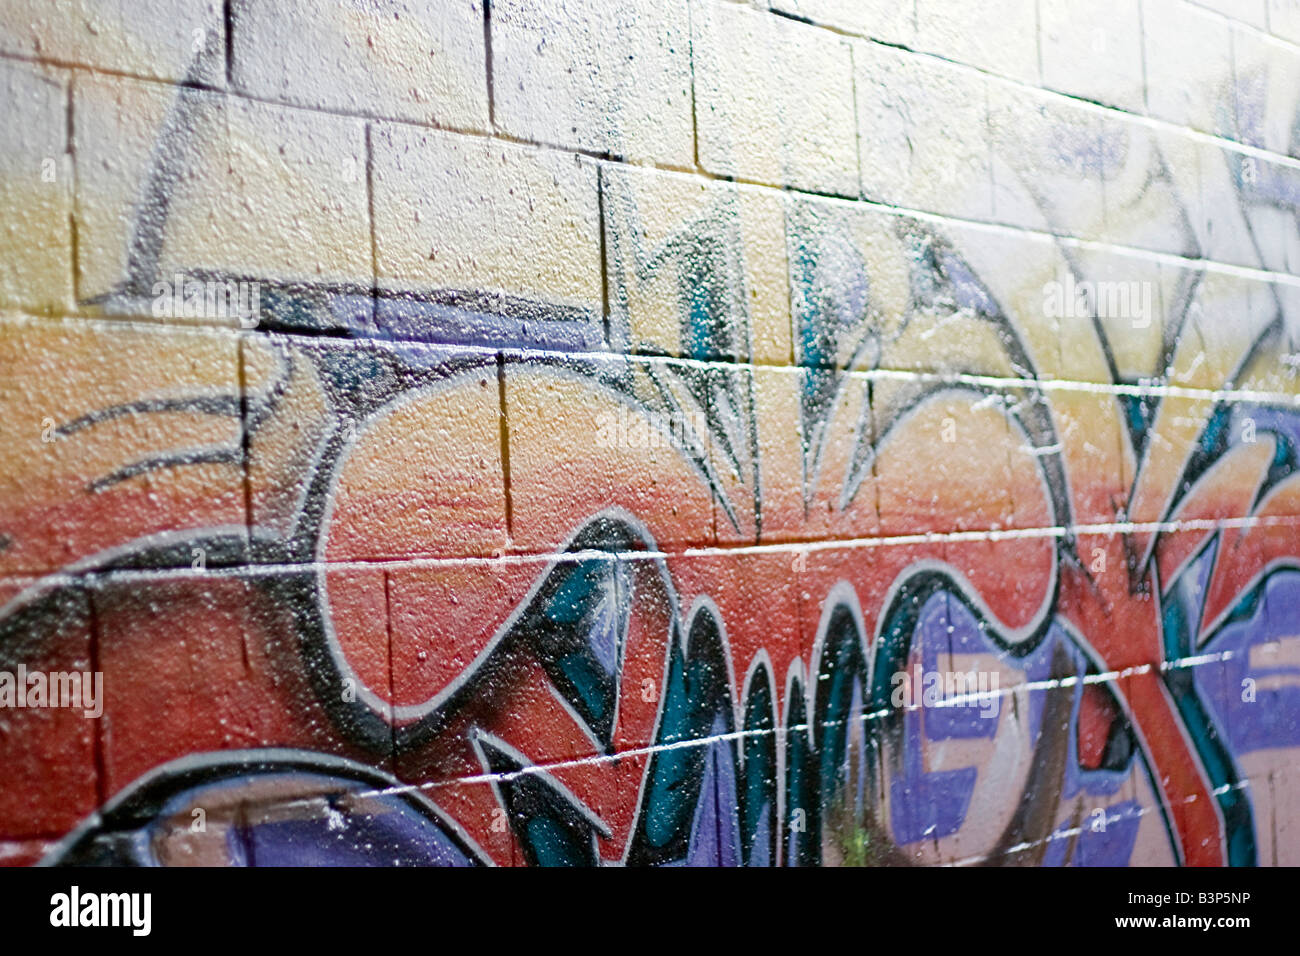 Colorful graffiti spray painted on a brick wall This makes a great background or backdrop Stock Photo